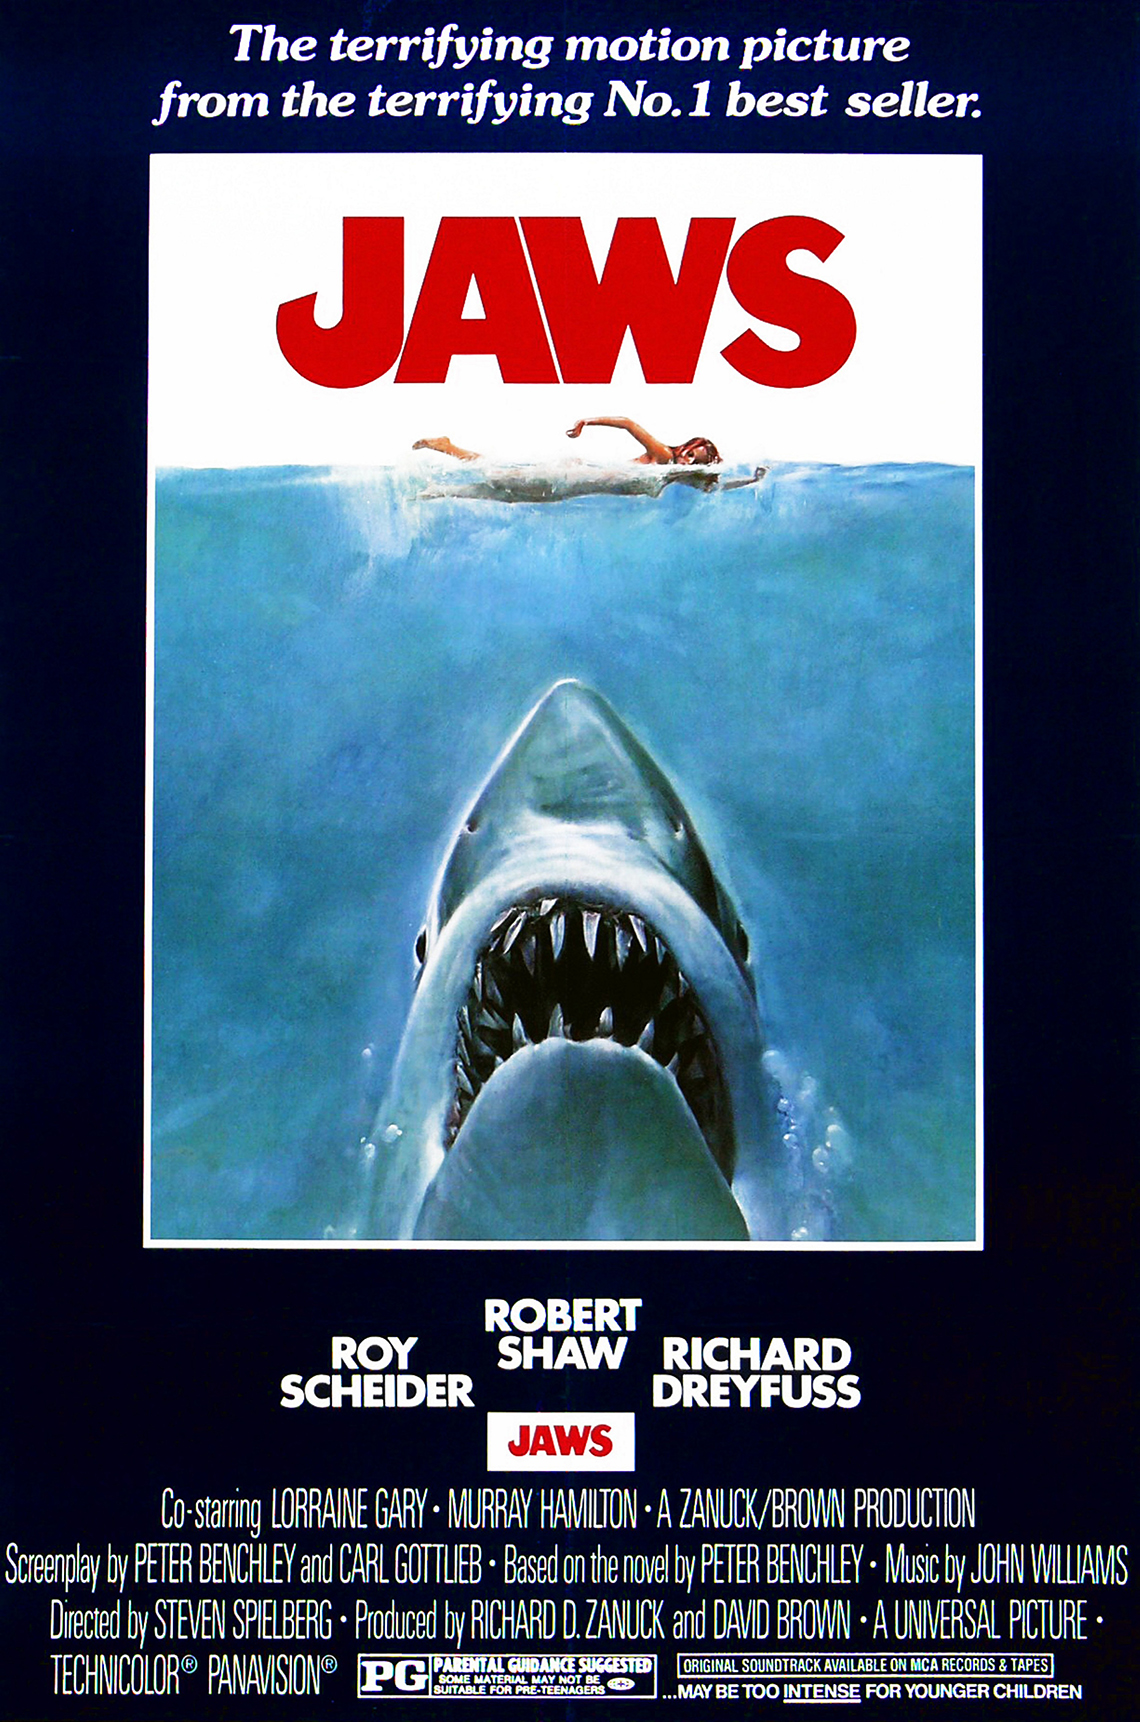 The movie poster for the 1975 film Jaws